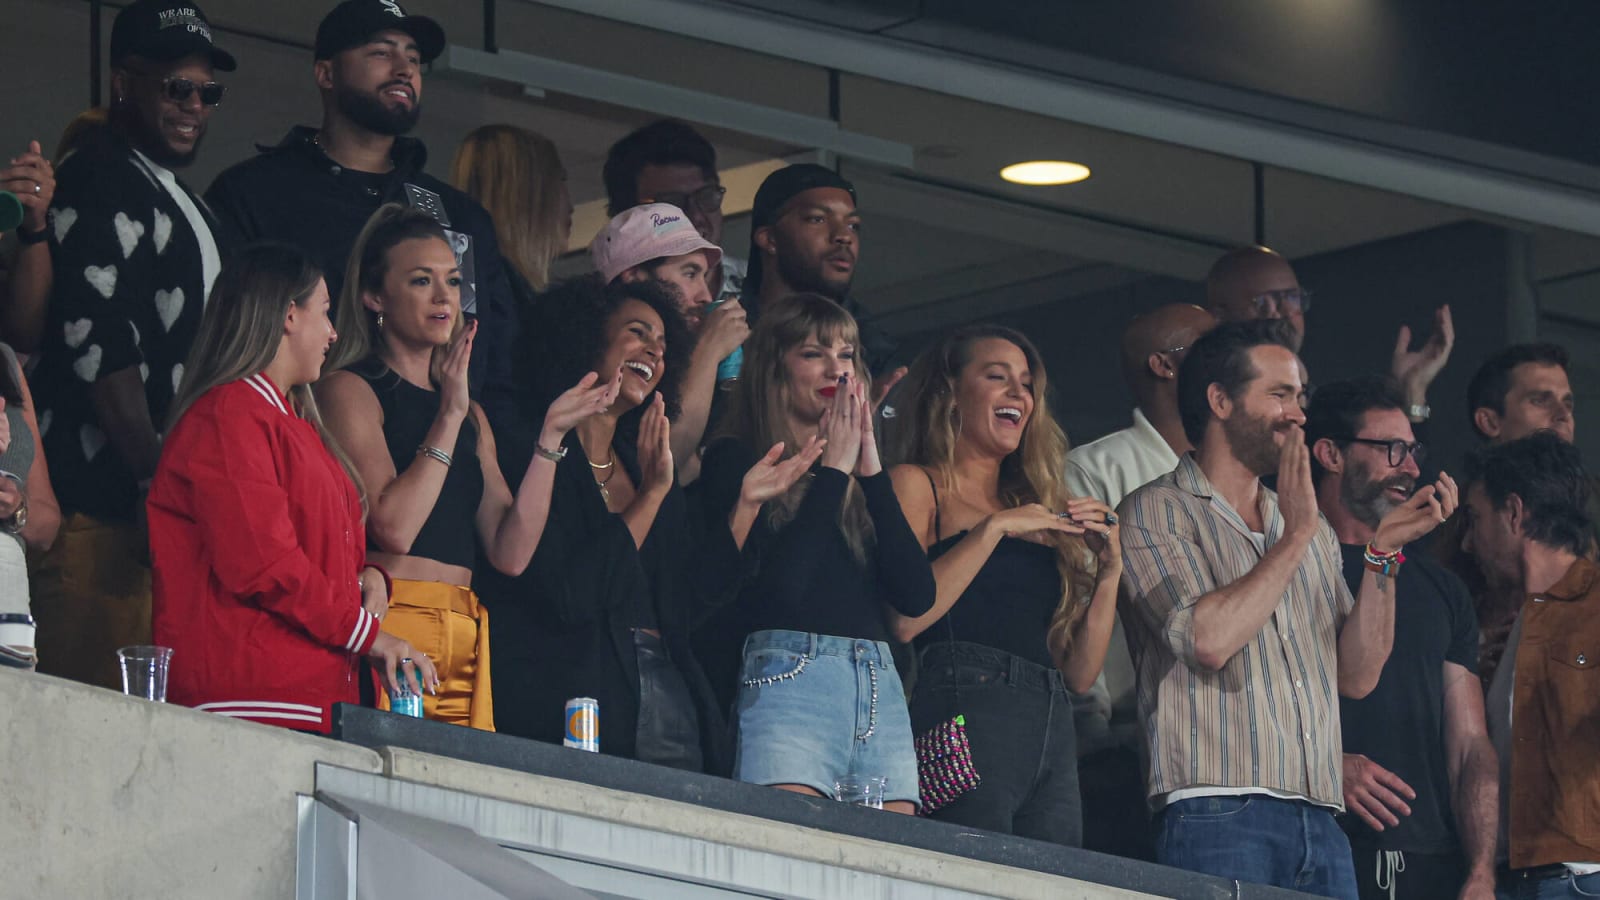 Taylor Swift, Blake Lively go crazy for early Chiefs touchdown | Yardbarker